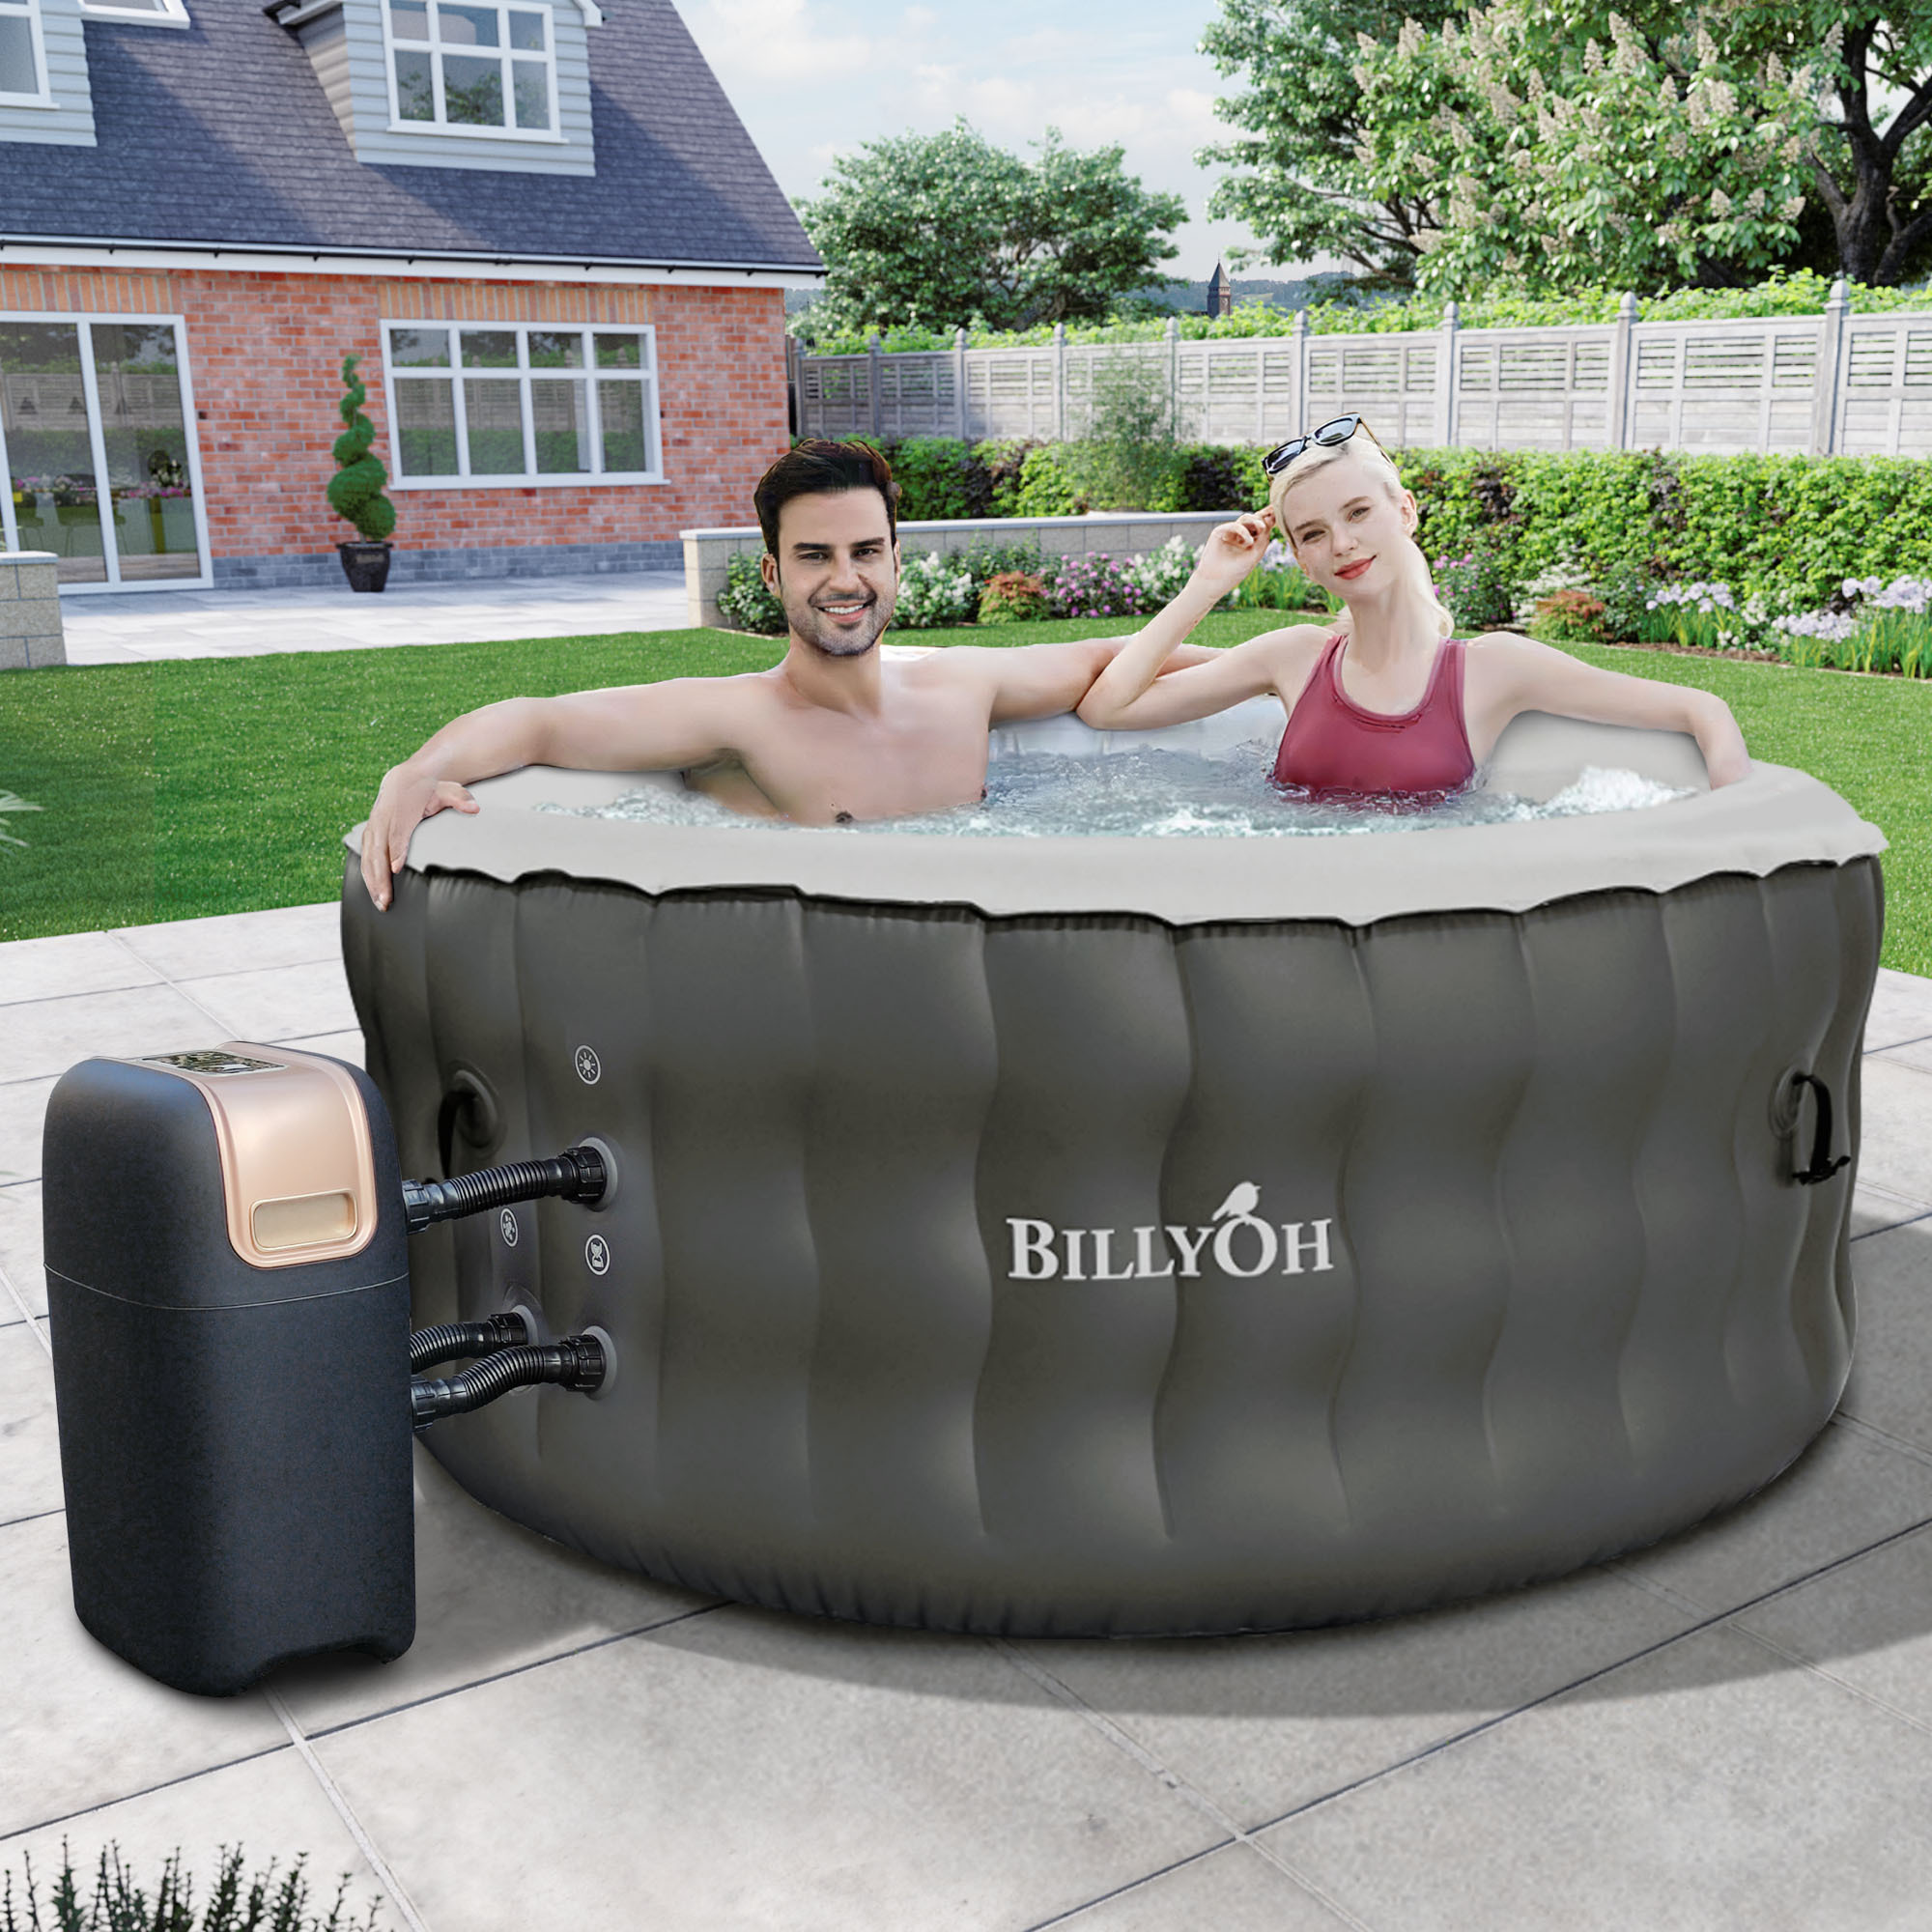 Respiro Round Inflatable Hot Tub with Jets 2-4 People | BillyOh